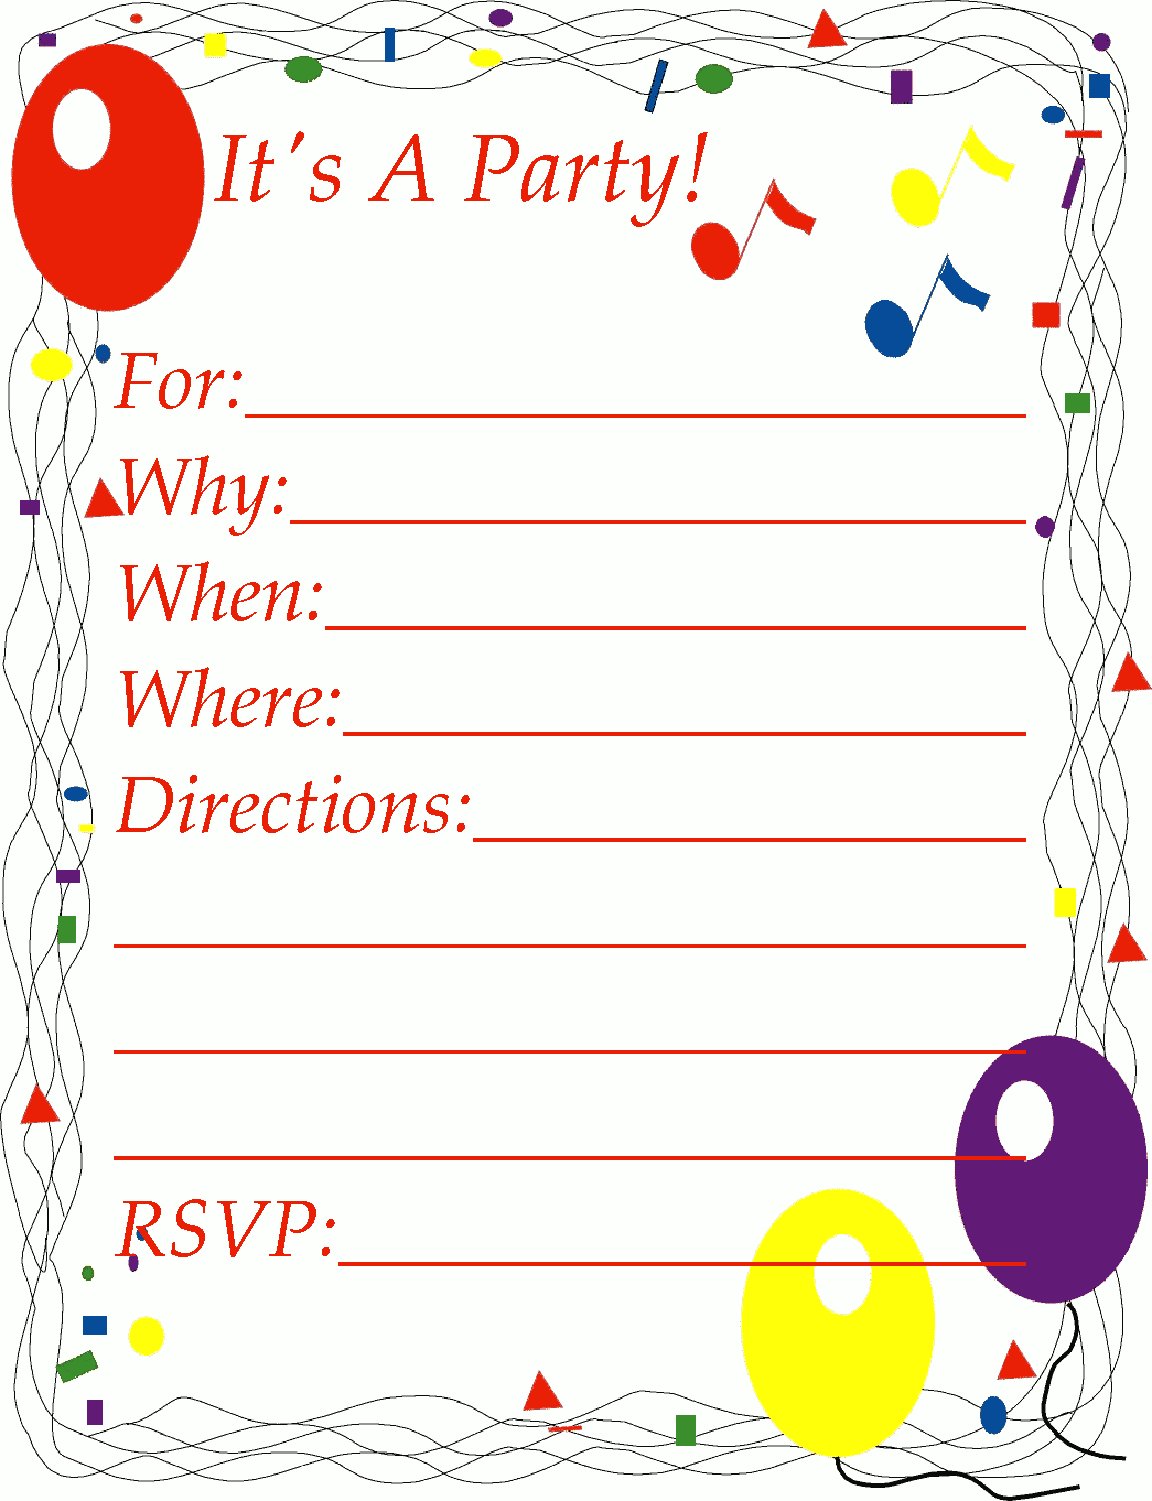 free clipart for christmas invitations - photo #18